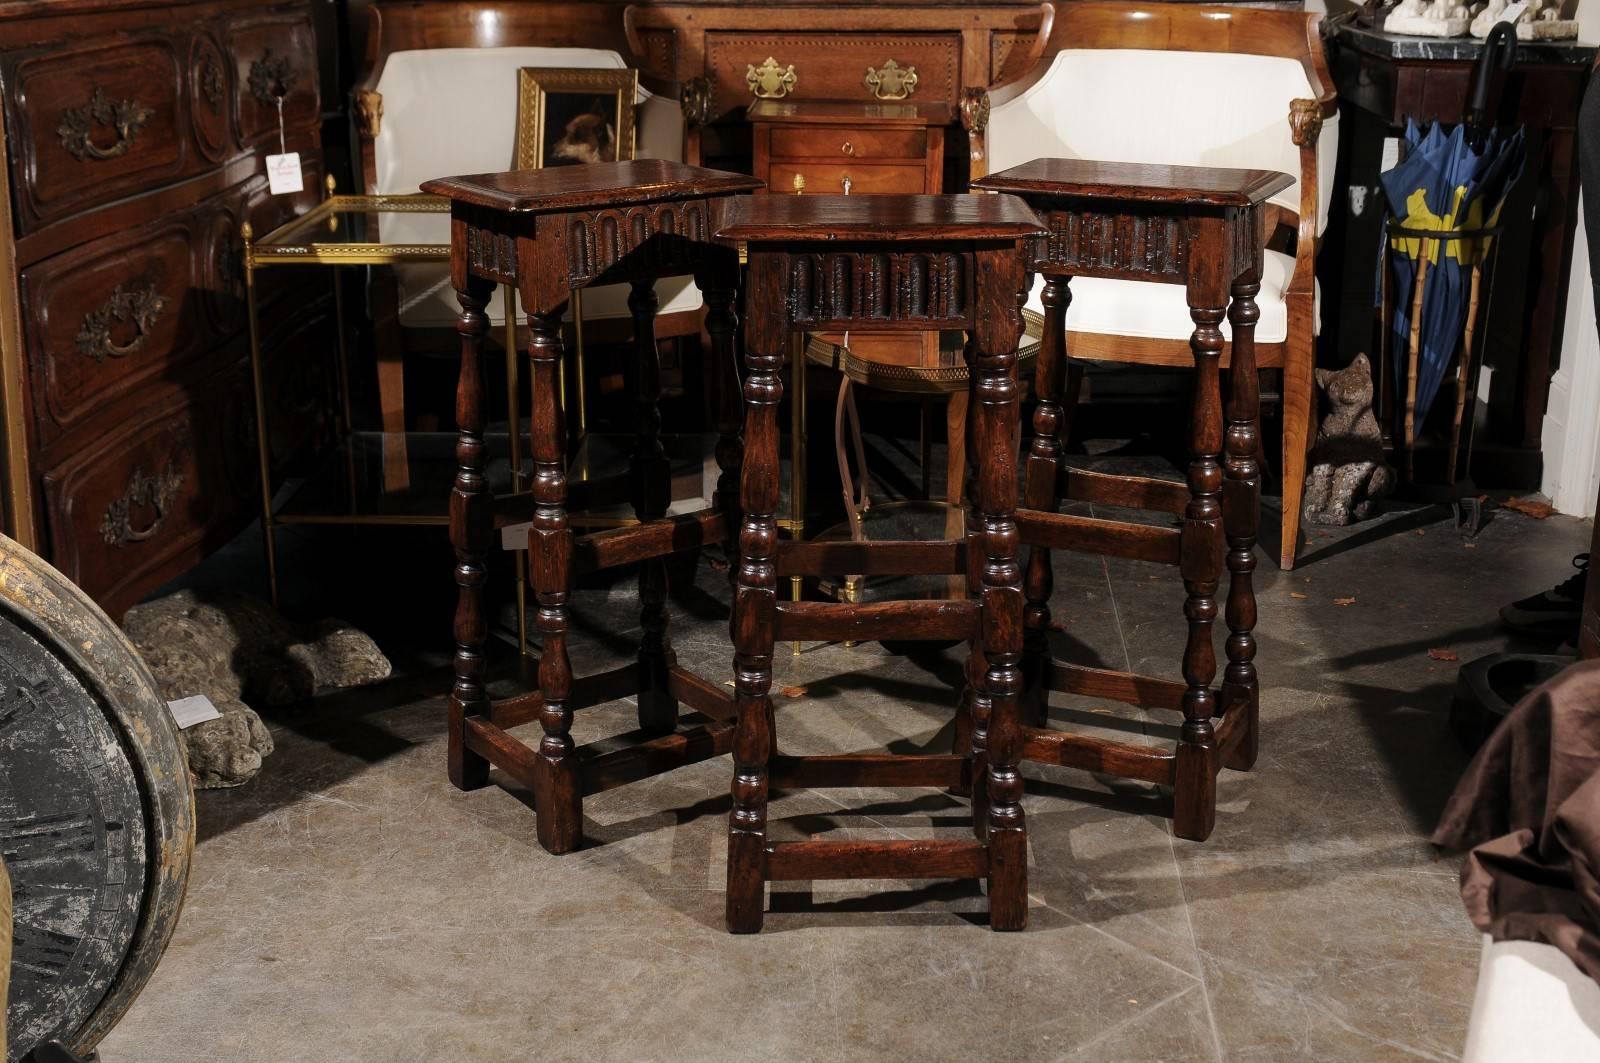 A set of three English Ipswich oak bar stools from the early 20th century. Each of this set of three wooden stools features a rectangular top with bevelled edges sitting above a nicely carved apron adorned with scoop patterns on all sides. The seats